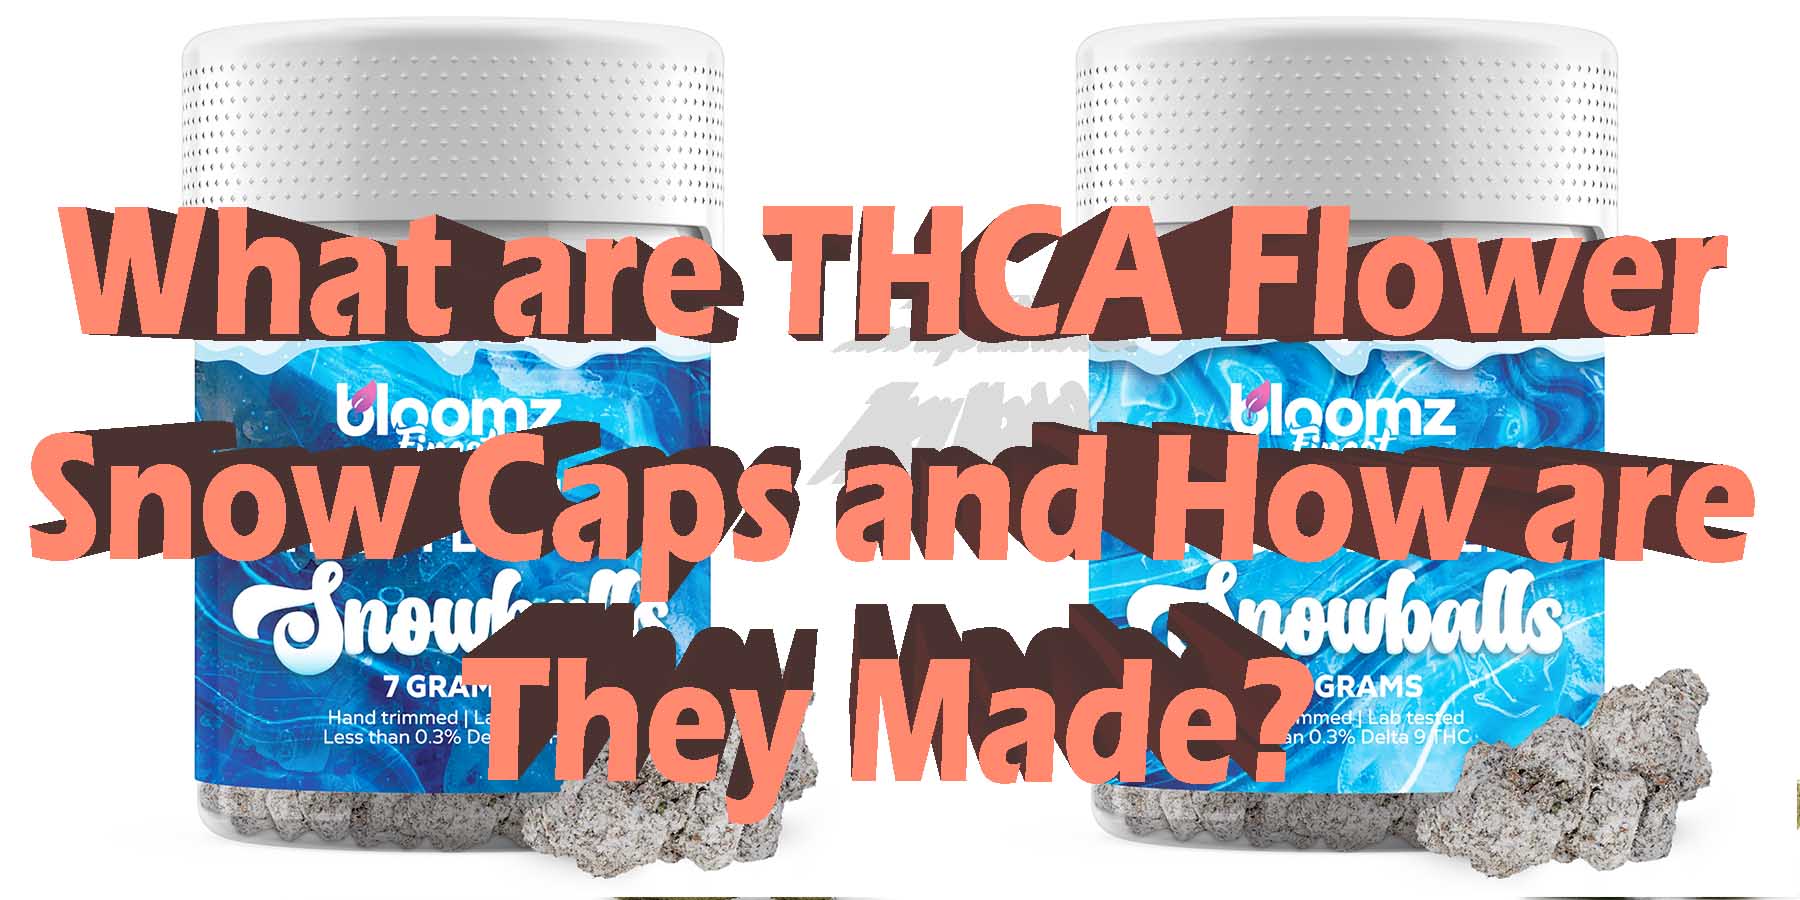 What are THCA Flower Snow Caps and How are They Made Coupon Discount For Smoking Best High Smoke THCA THC Cannabinoids Shop Online Near Me Bloomz